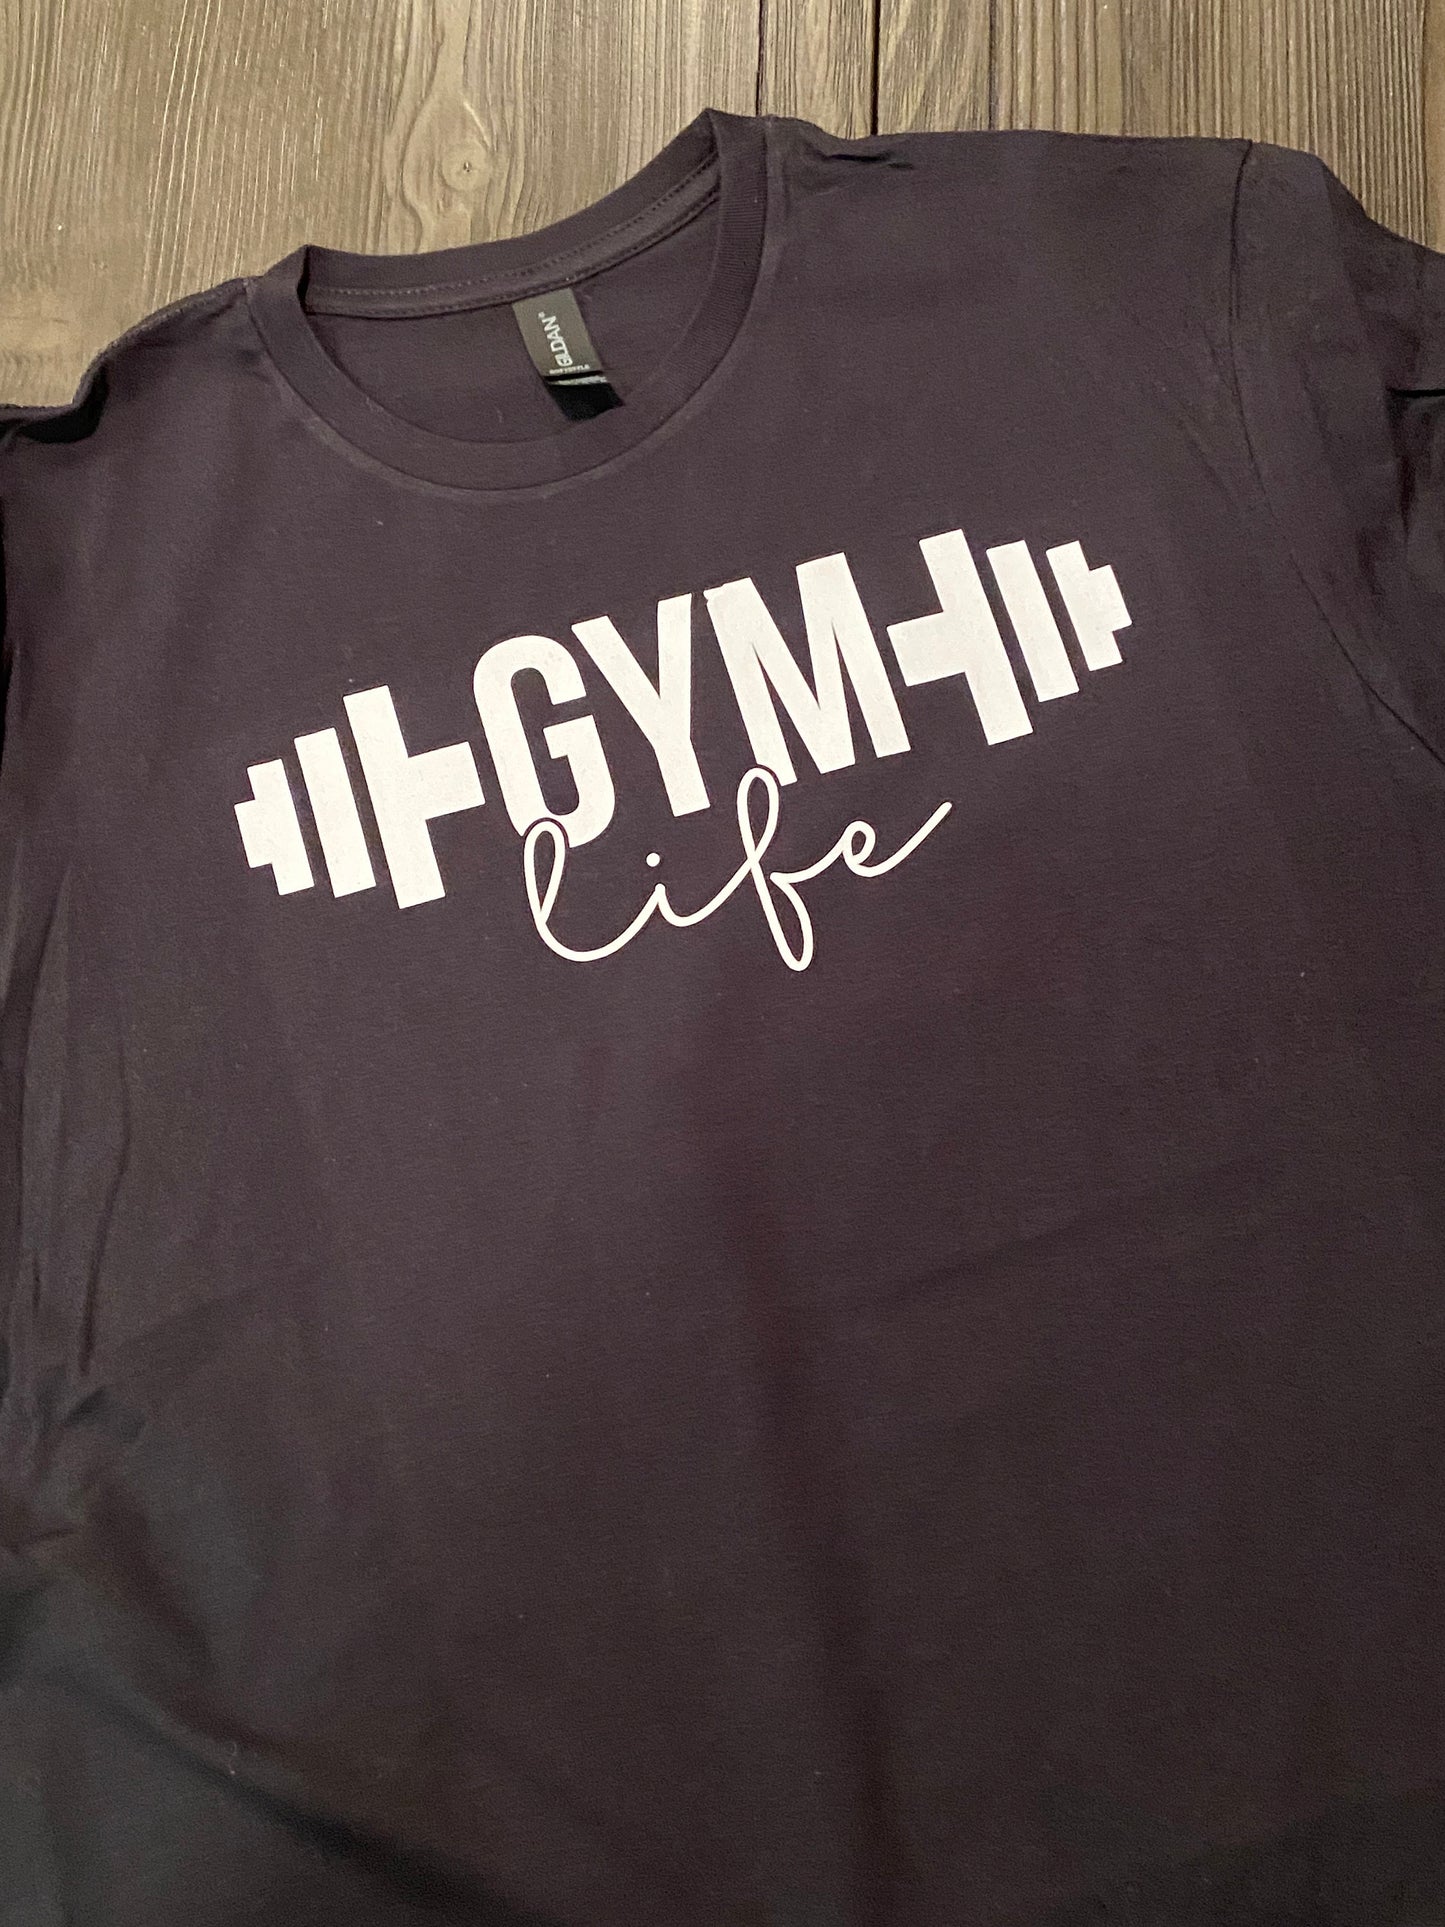 Gym Life shirt, Perfect shirt for the Gym, Graphic Tee Shirt, unisex sizing for comfy fit